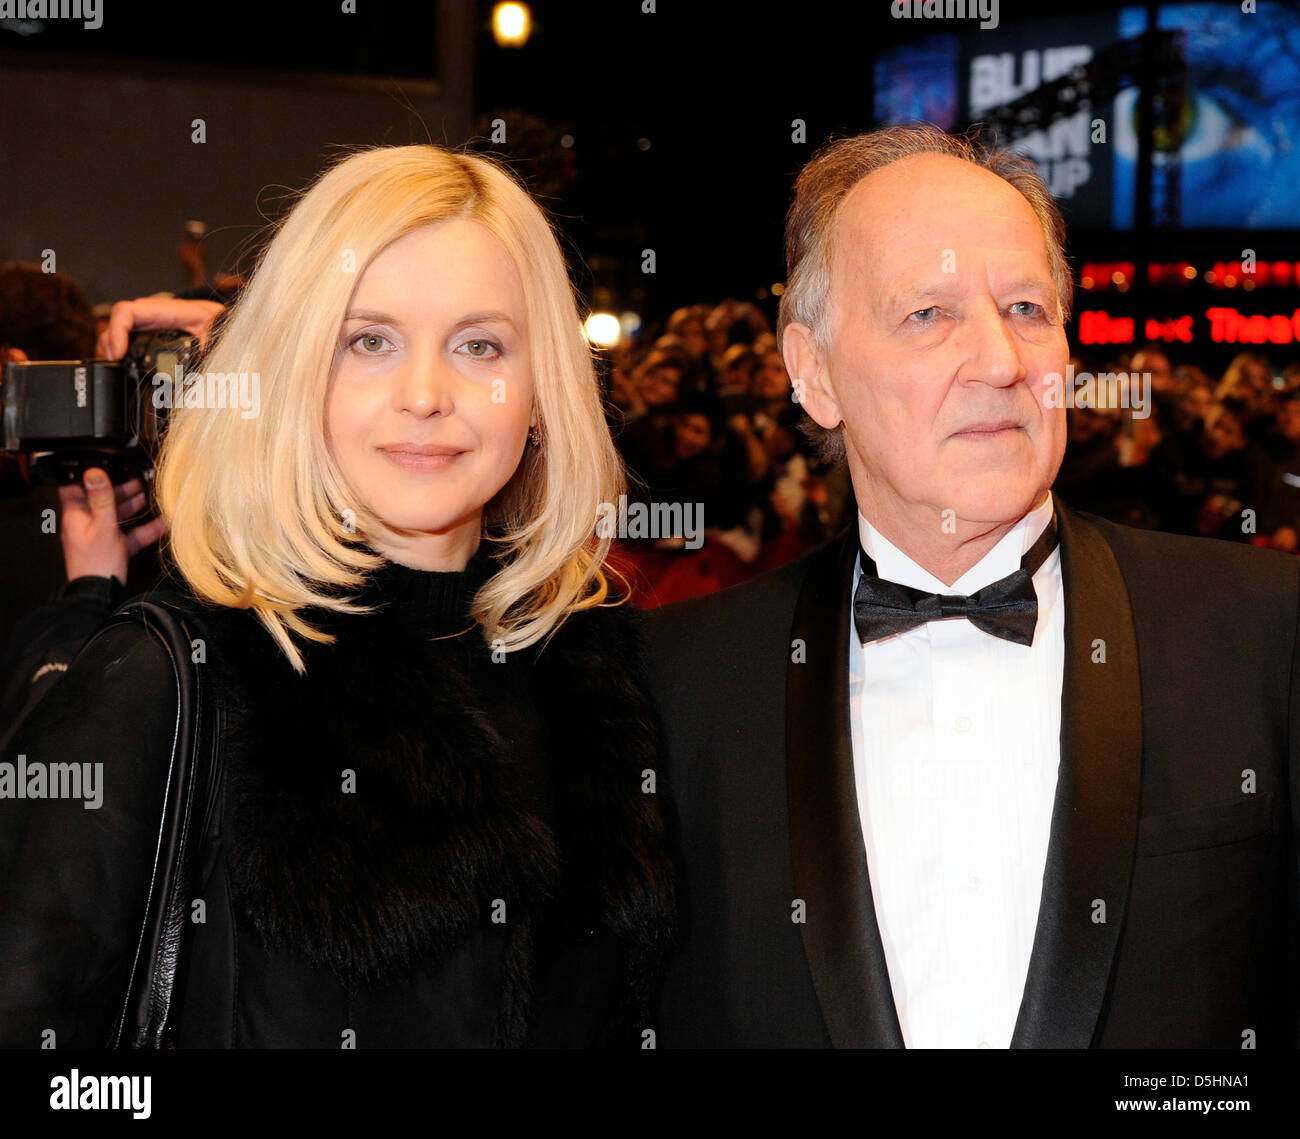 Jury president Werner Herzog and his wife Lena arrive for the closing ...